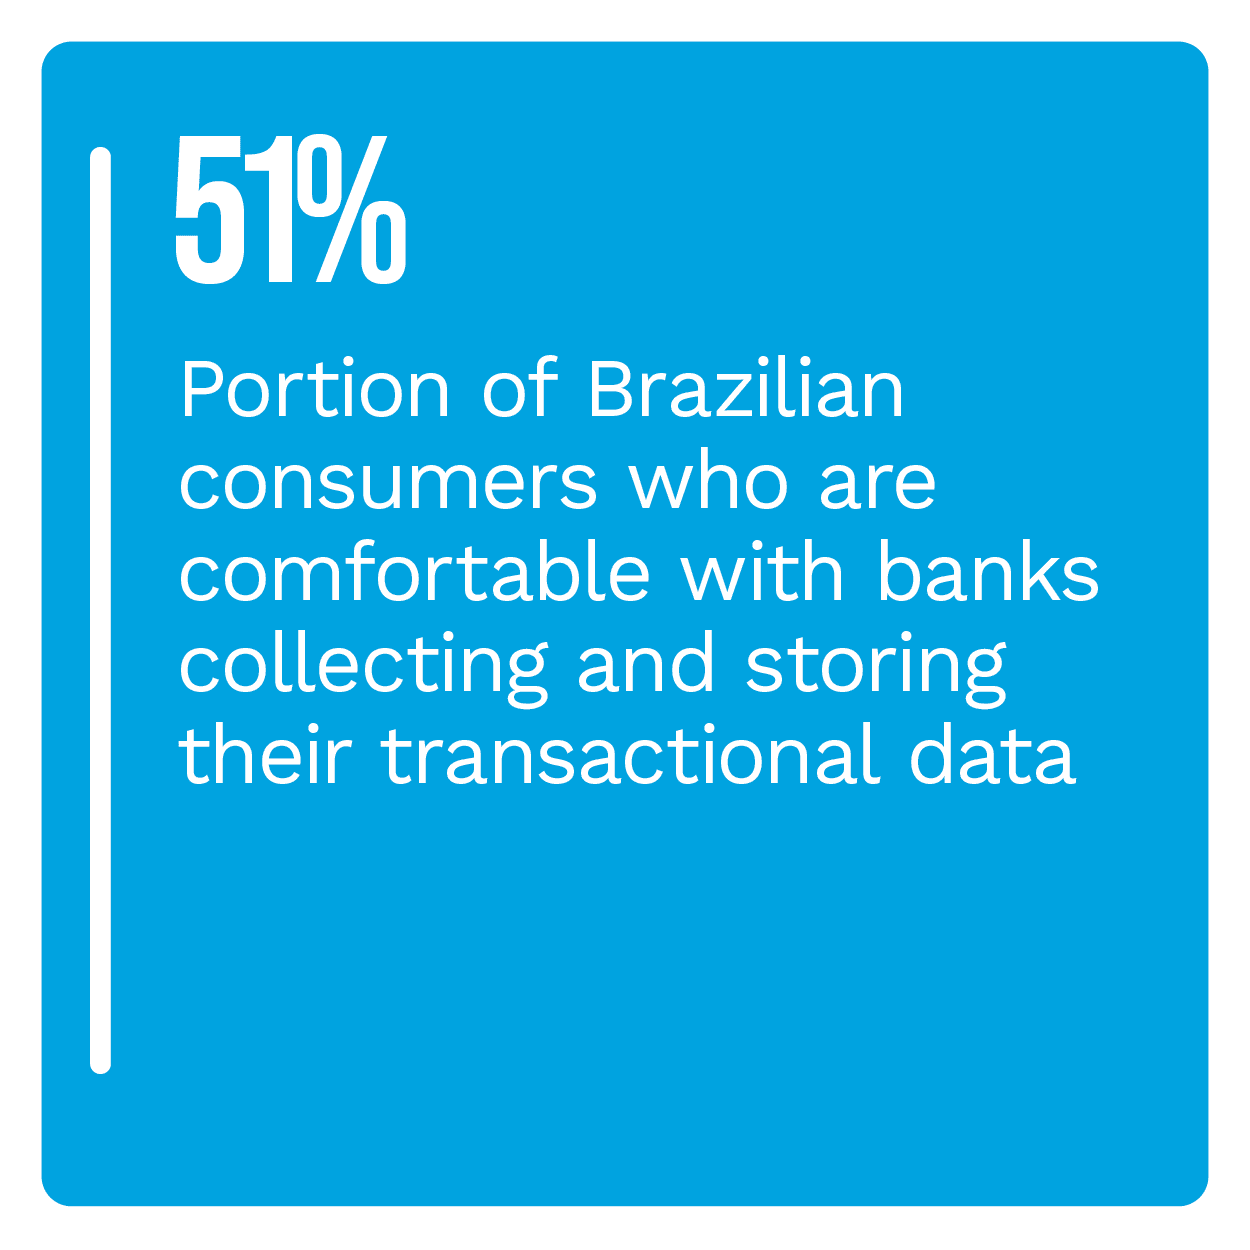 Portion of consumers in Brazil who are okay with banks keeping their transactional data